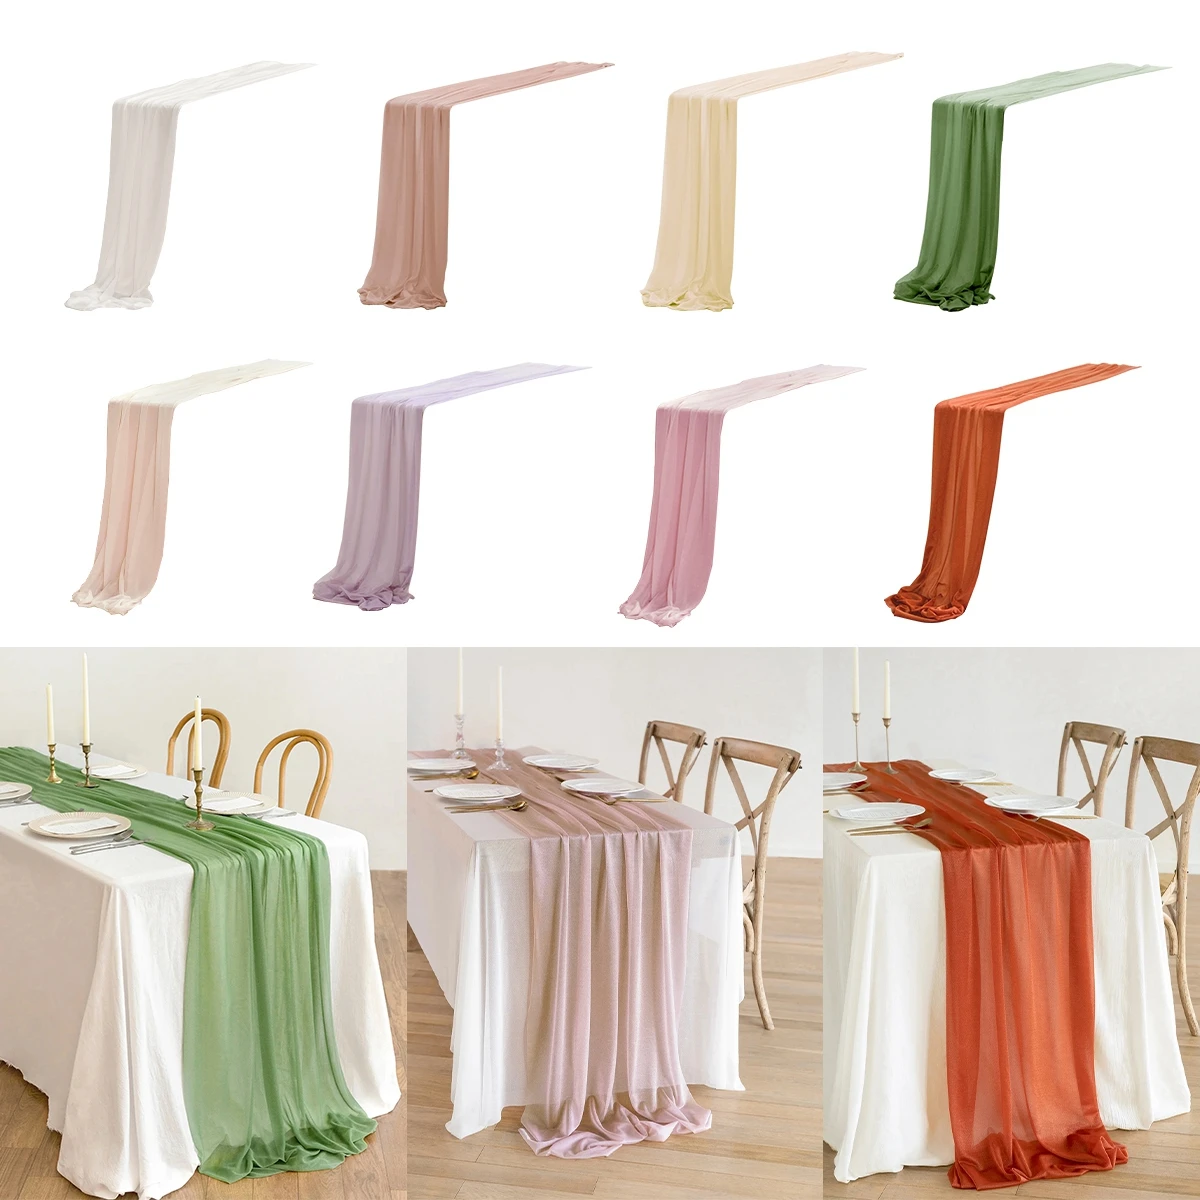 

75x180cm Chiffon Table Runner Dining Table Decoration Cotton Gauze Table Runner Romantic Boho Tablecloth for Wedding Party Decor